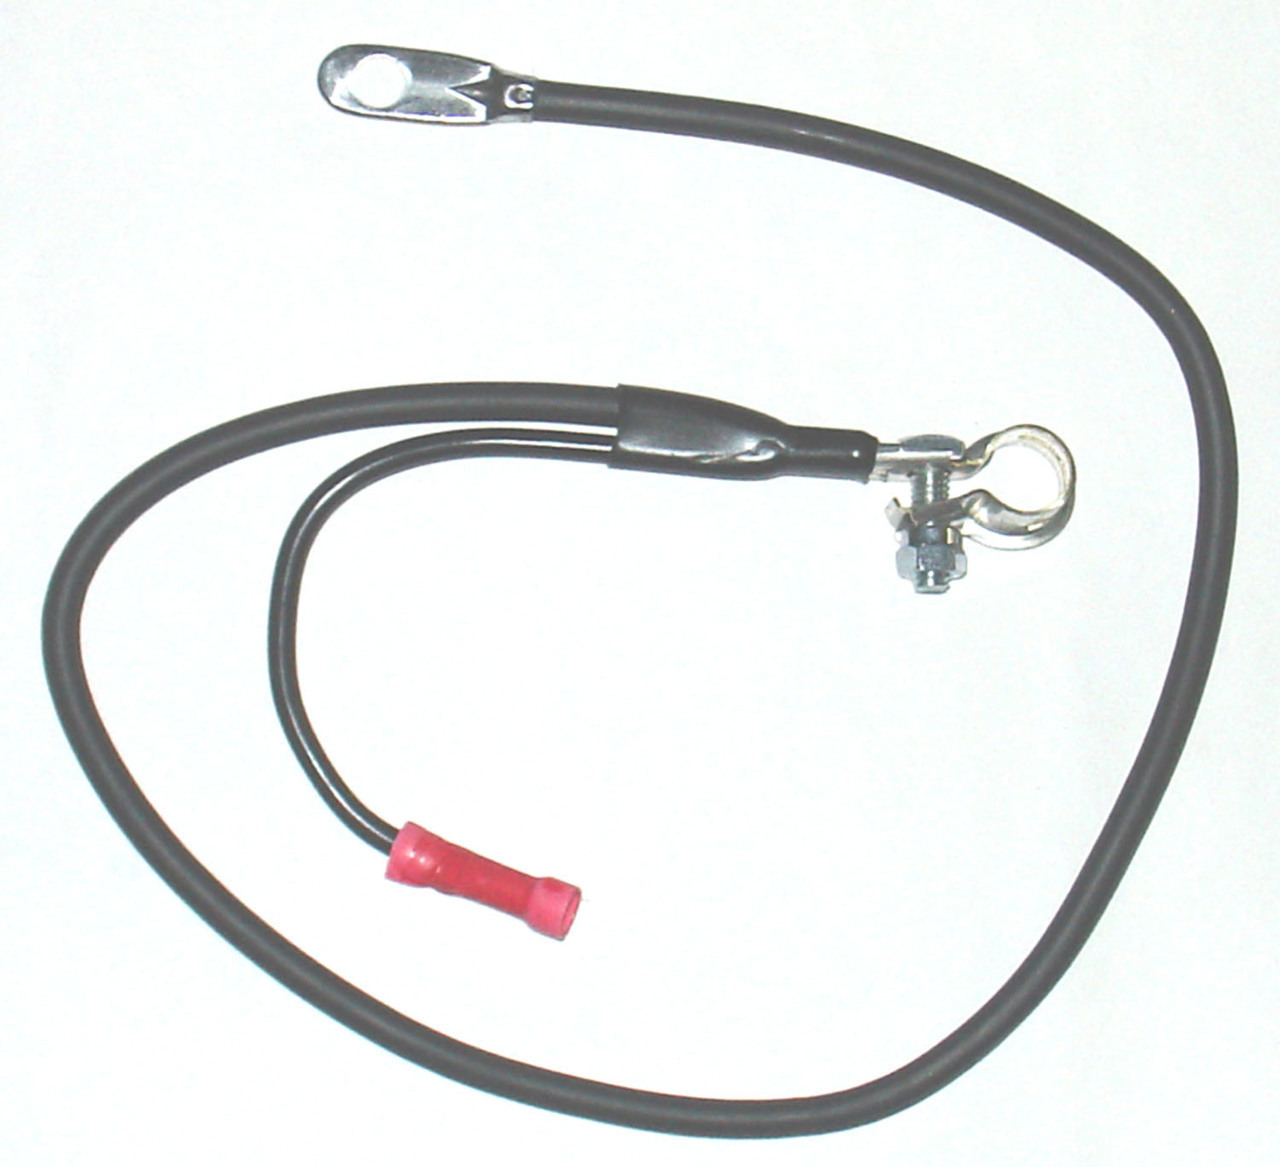 1998 Toyota camry battery cables